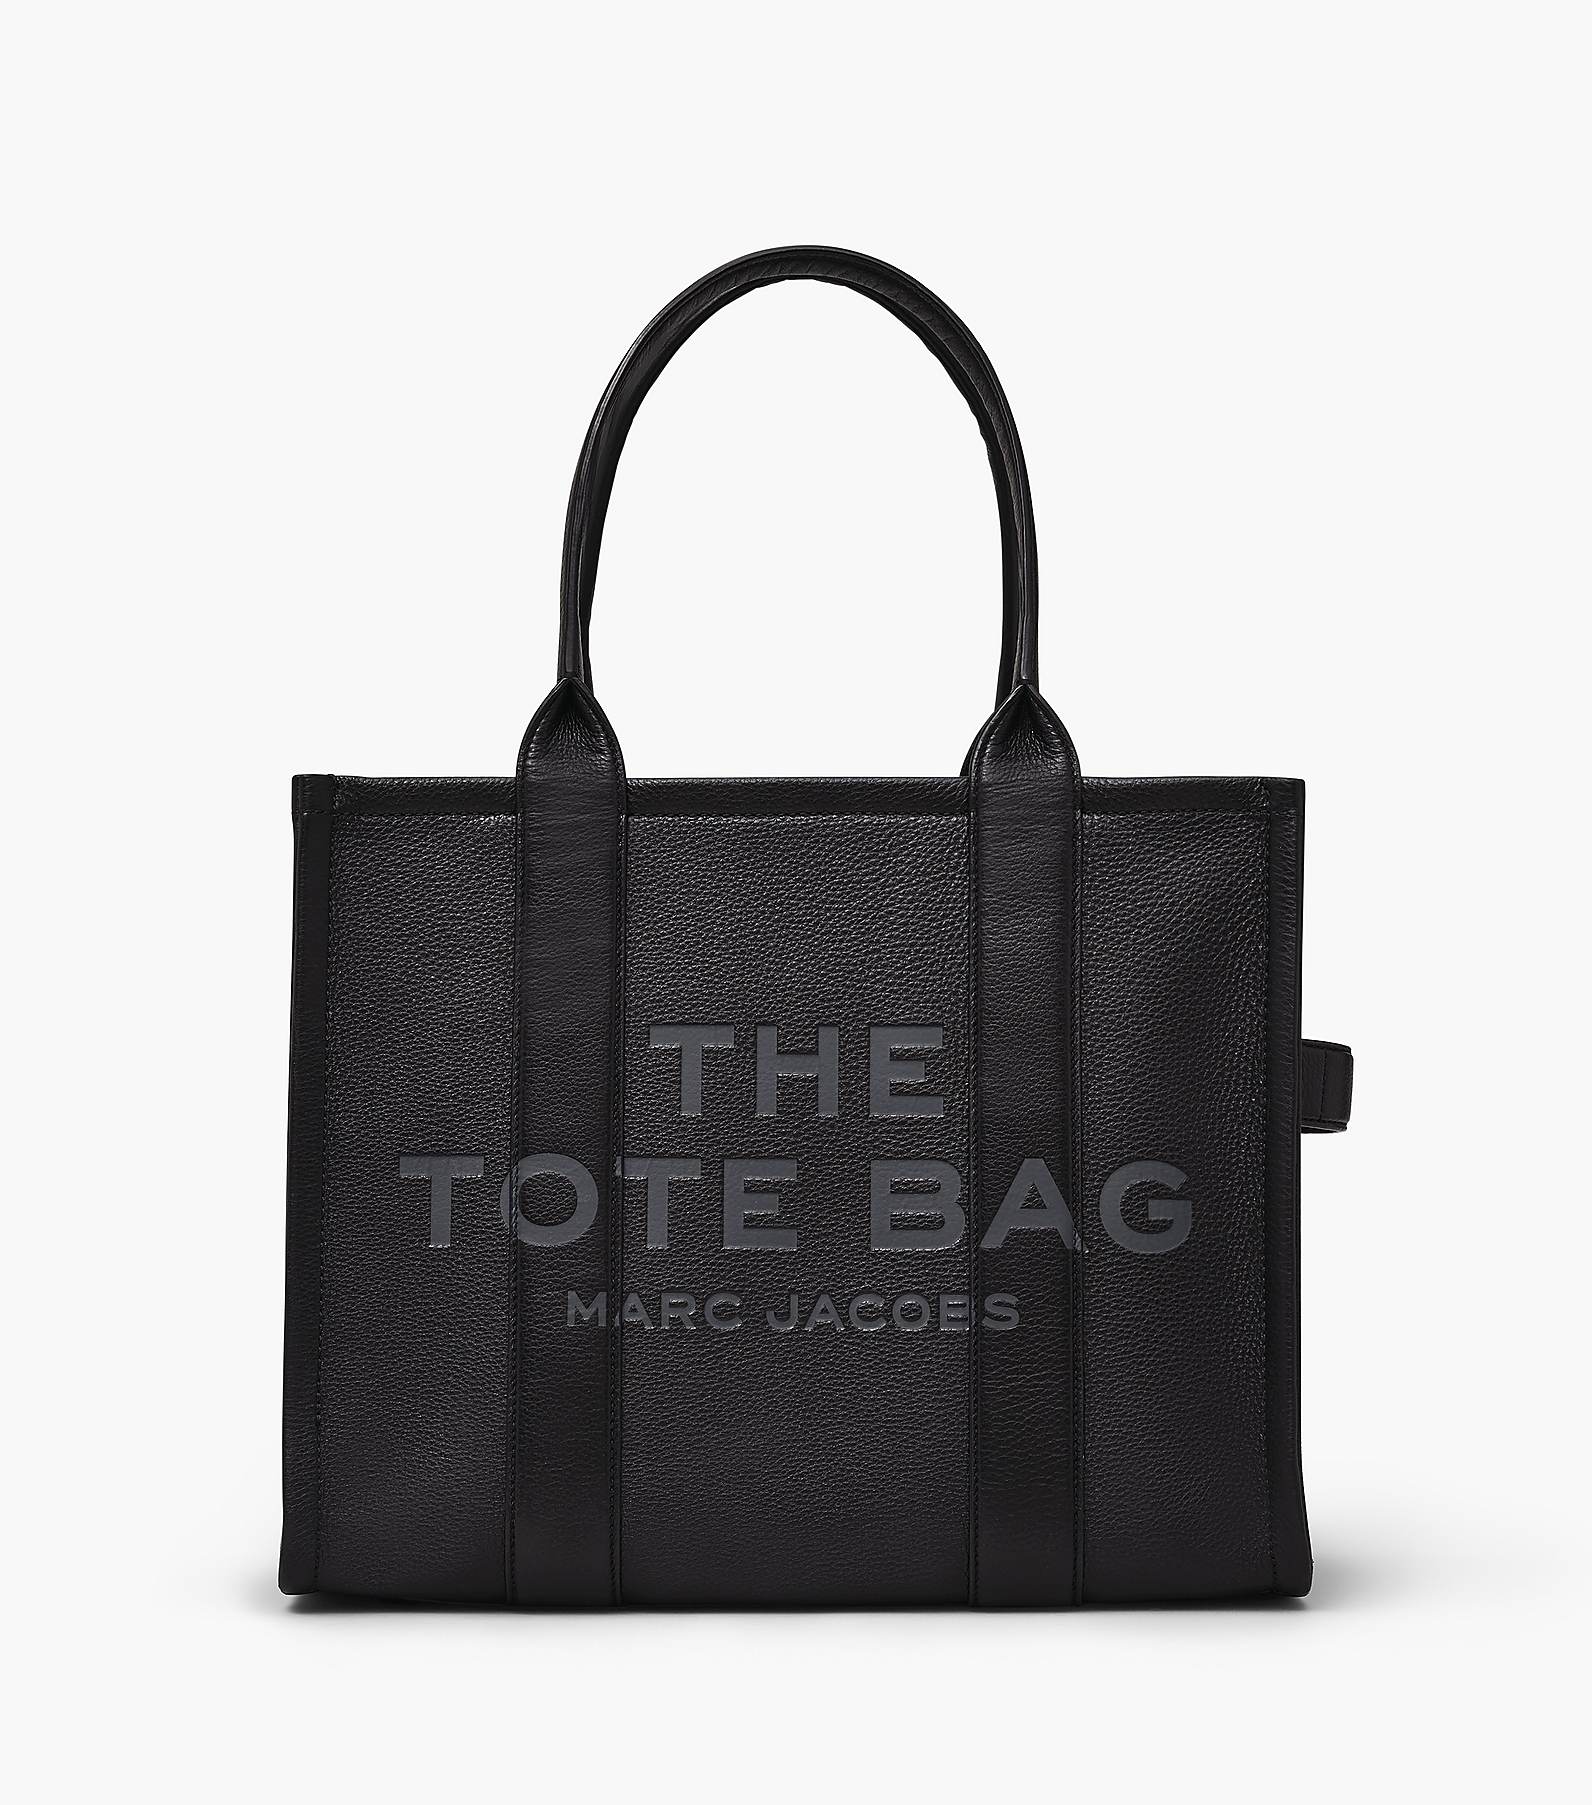 THE LEATHER TOTE BAG LARGE | マーク ジェイコブス | 公式サイト